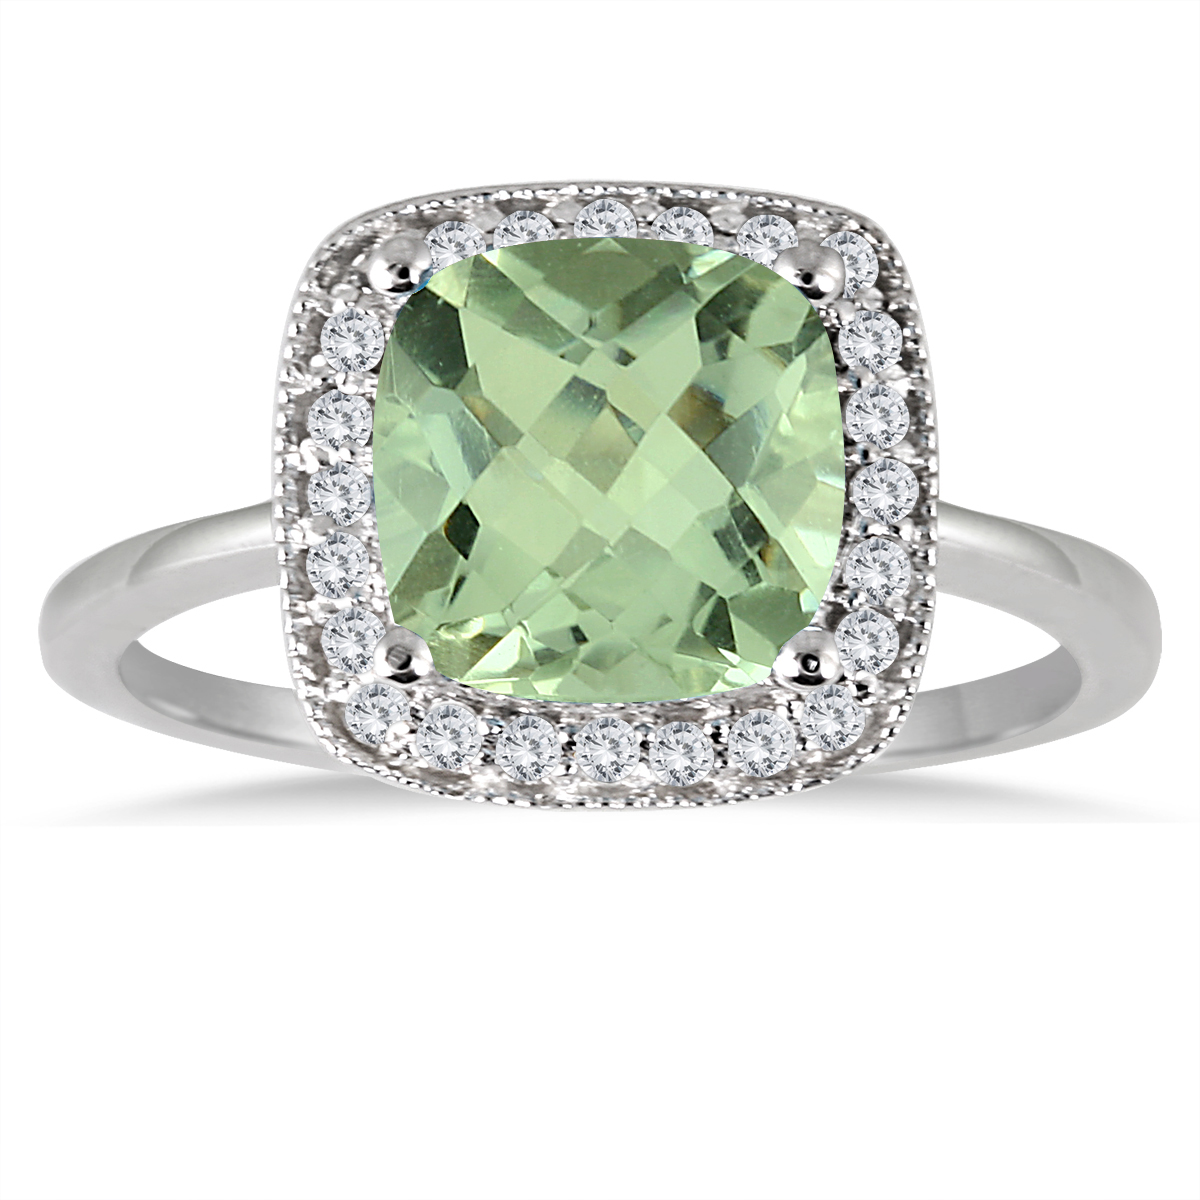 1.30 Carat Cushion Cut Green Amethyst and Diamond Ring in 14K White Gold